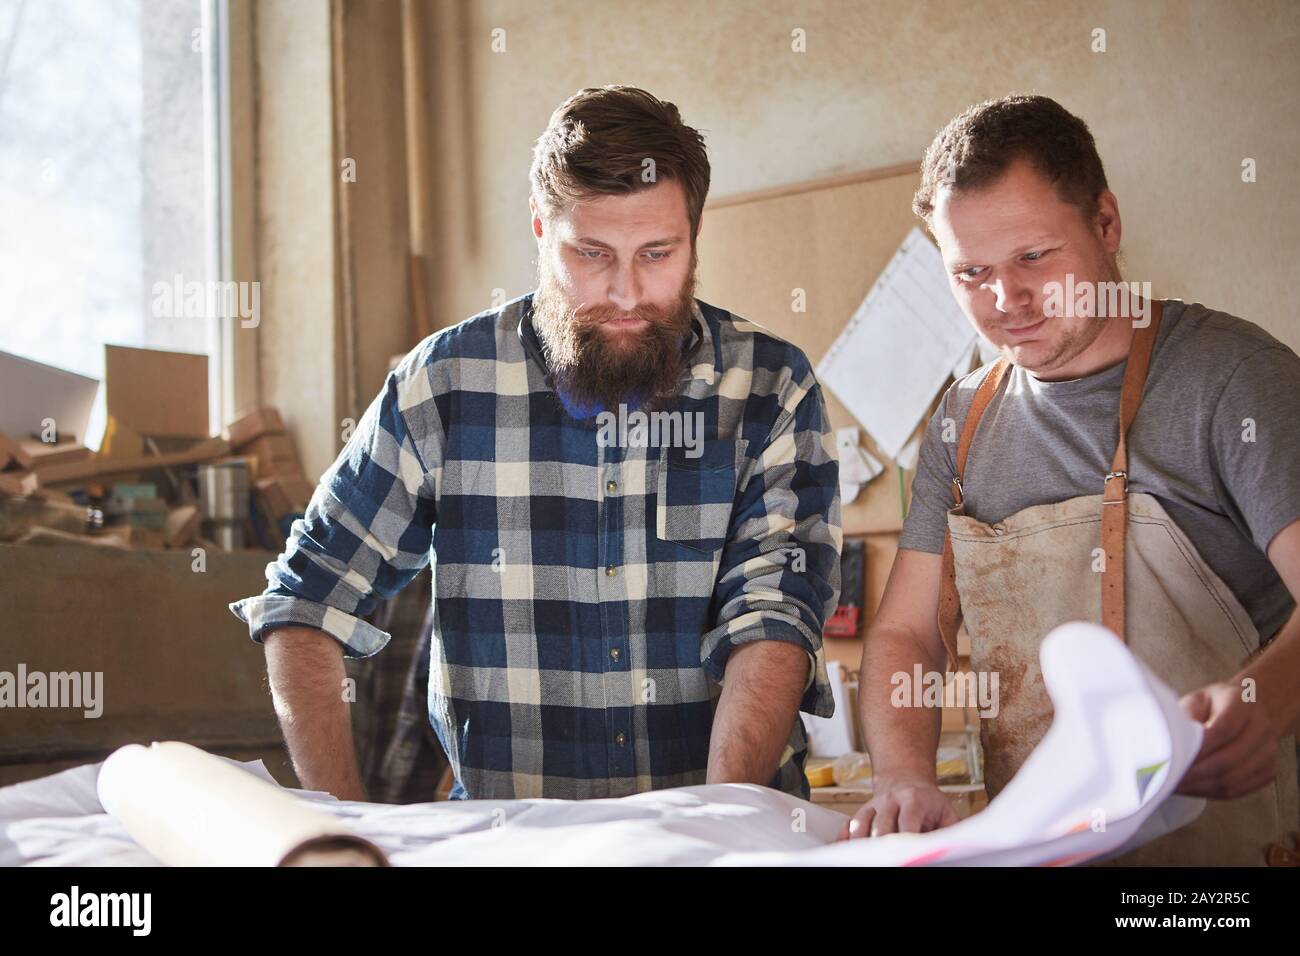 Carpenter and architect look at a construction drawing together Stock Photo